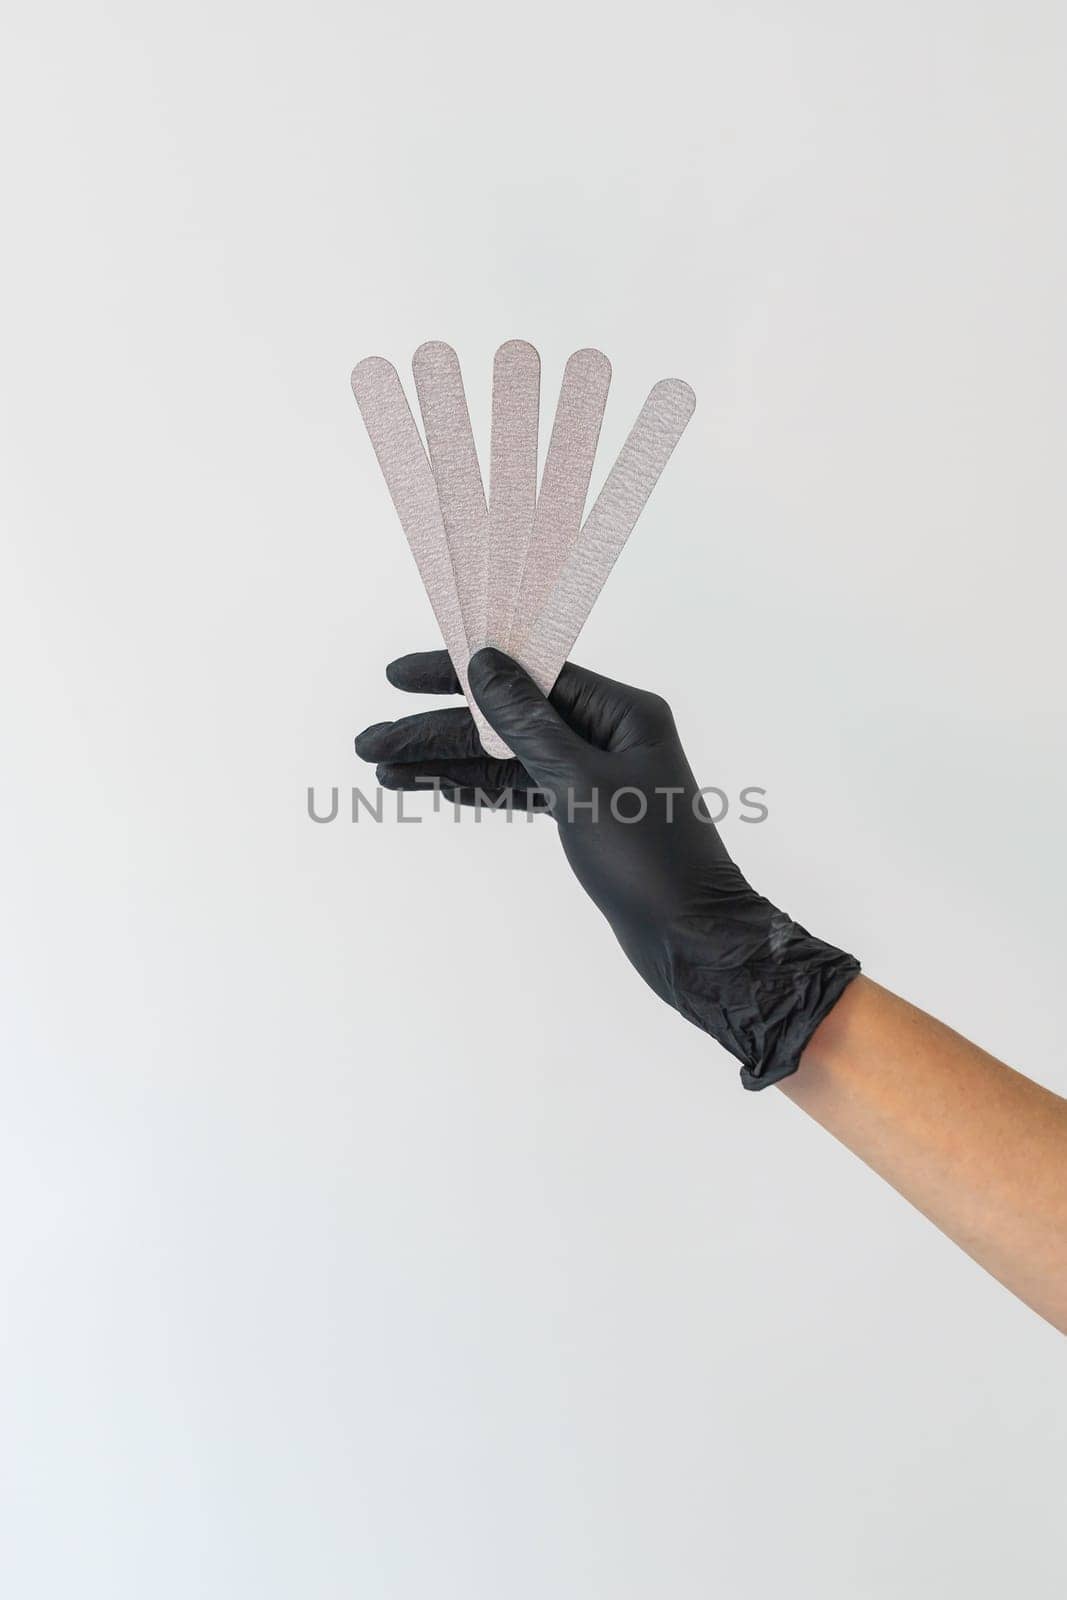 Female hand holds nails files on white background. Concept of polishing nails. Spa treatment beauty. White background with copy space. by Satura86